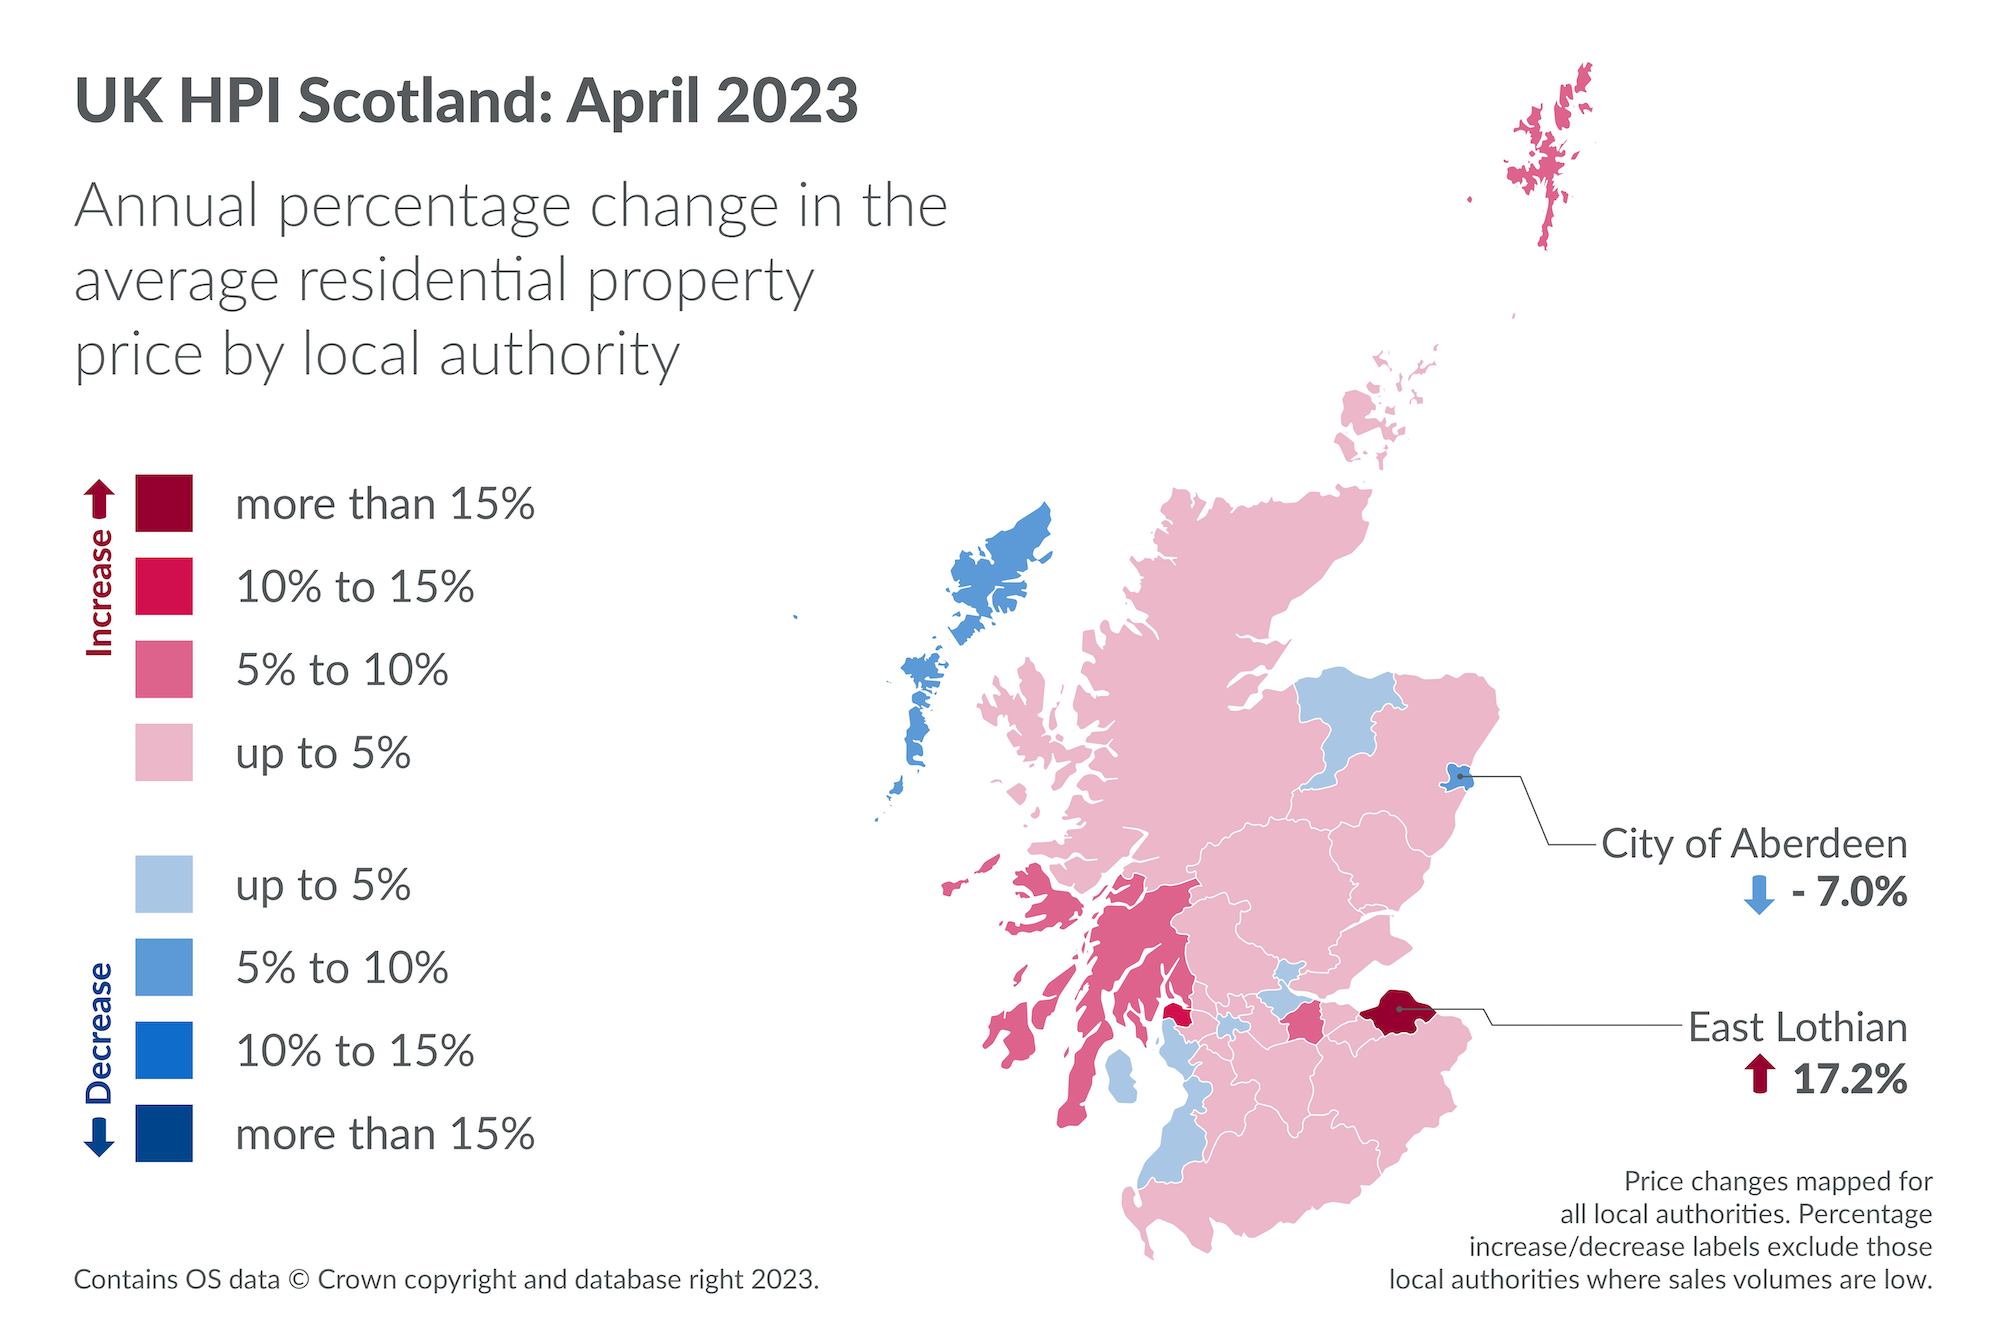 Scotland's house prices rise amid declining sales